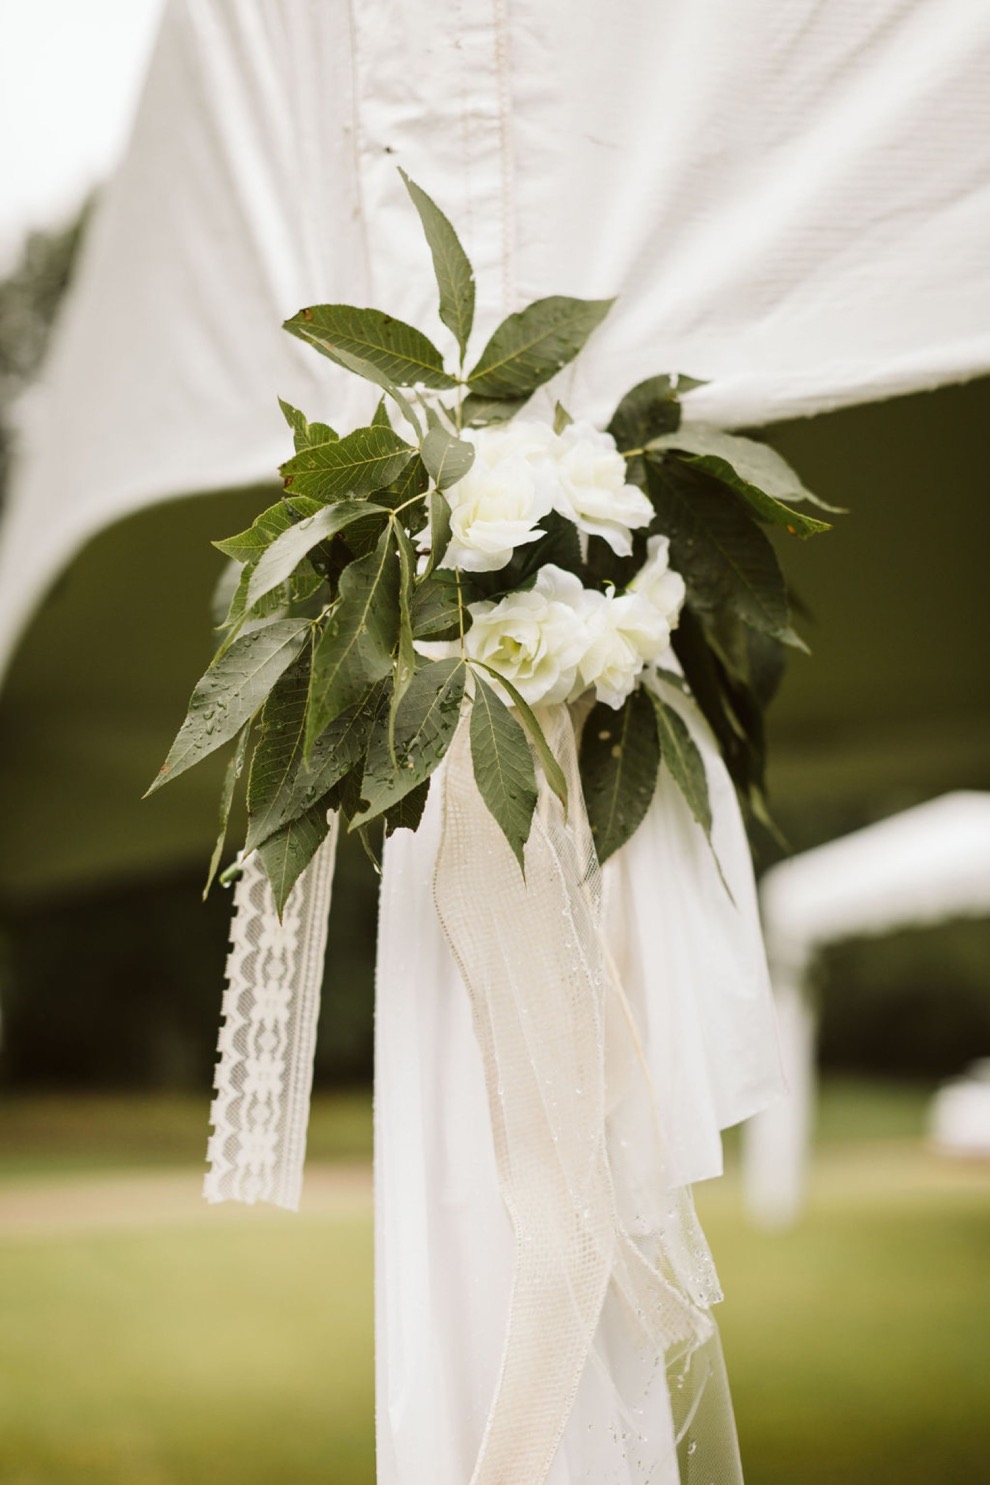 white and green wedding day flowers tied with lace at the corner of backyard wedding tent